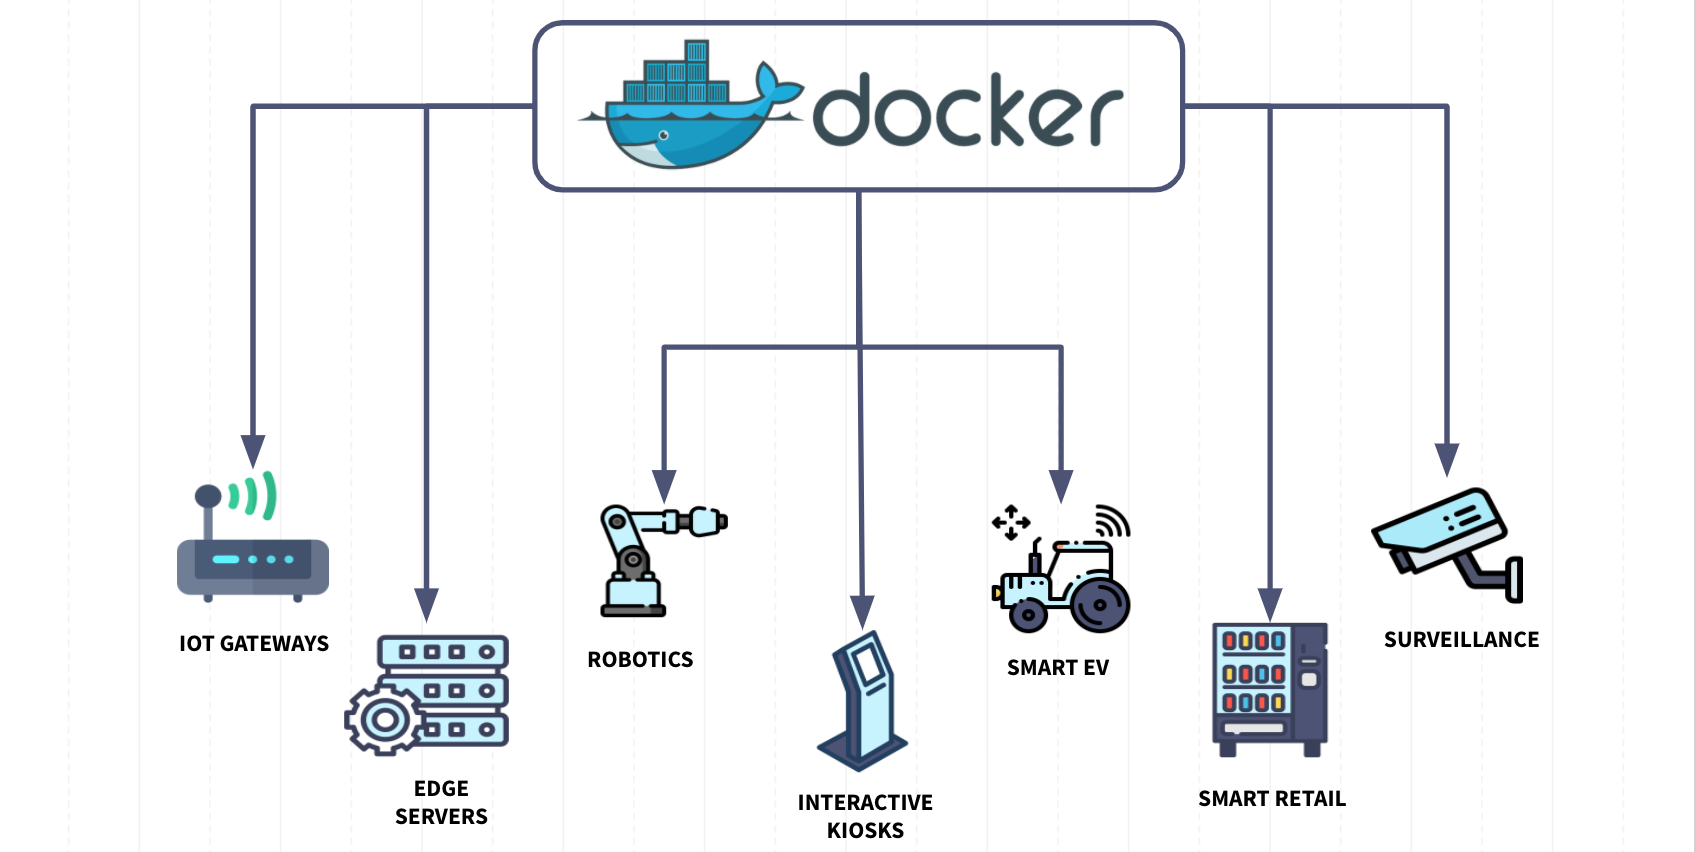 Deploy Docker Containers to Embedded Linux Devices | Aikaan